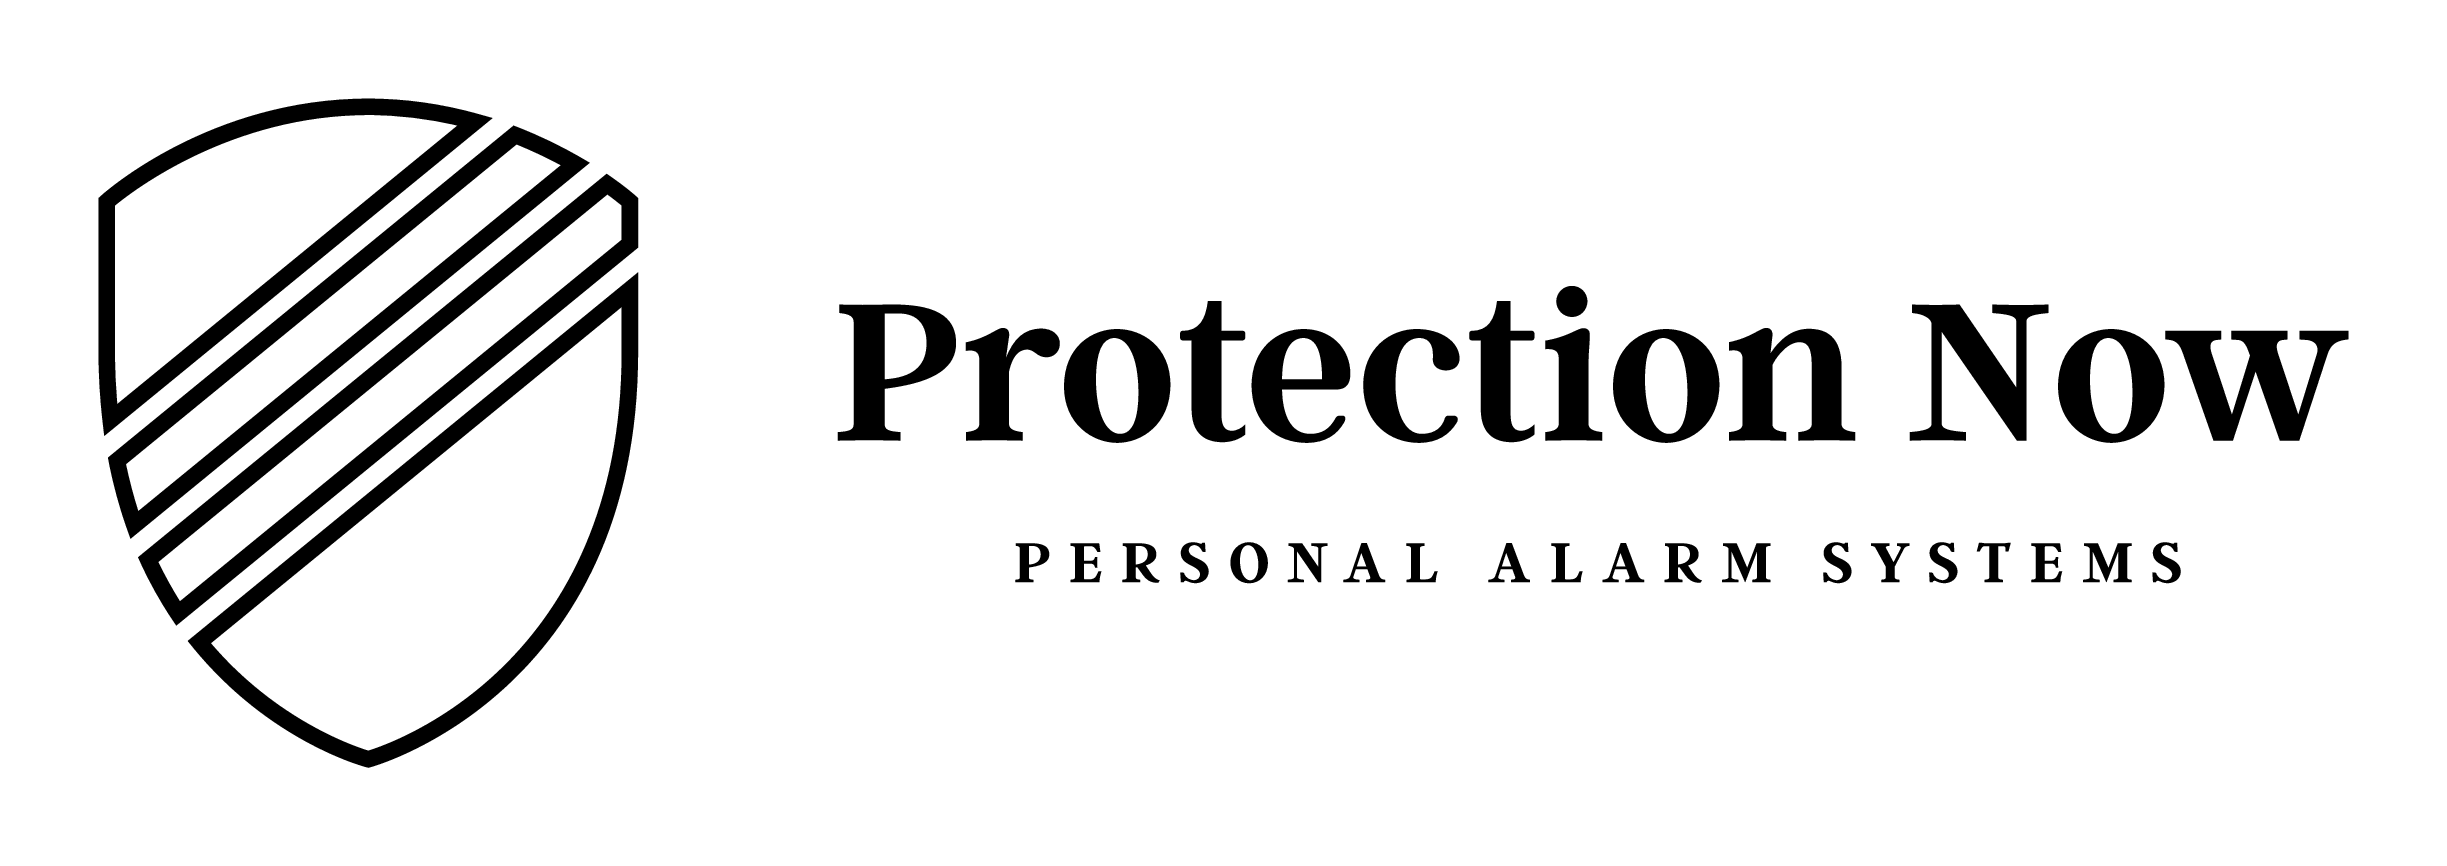 My Protection Now Symbol